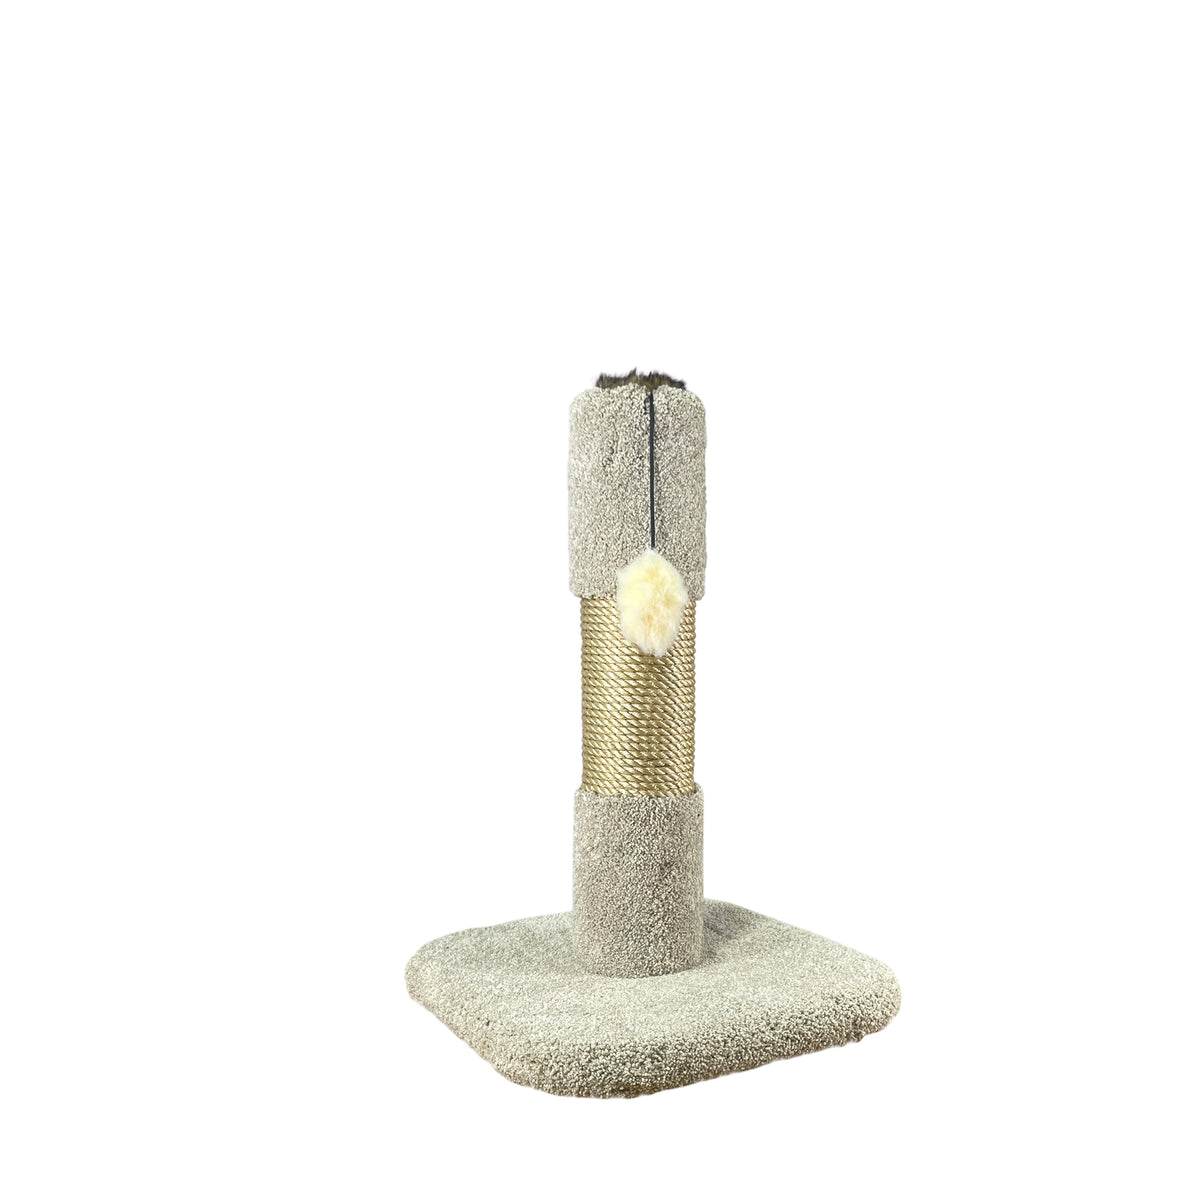 KatAttack Sierra Post Sisal with Square Base